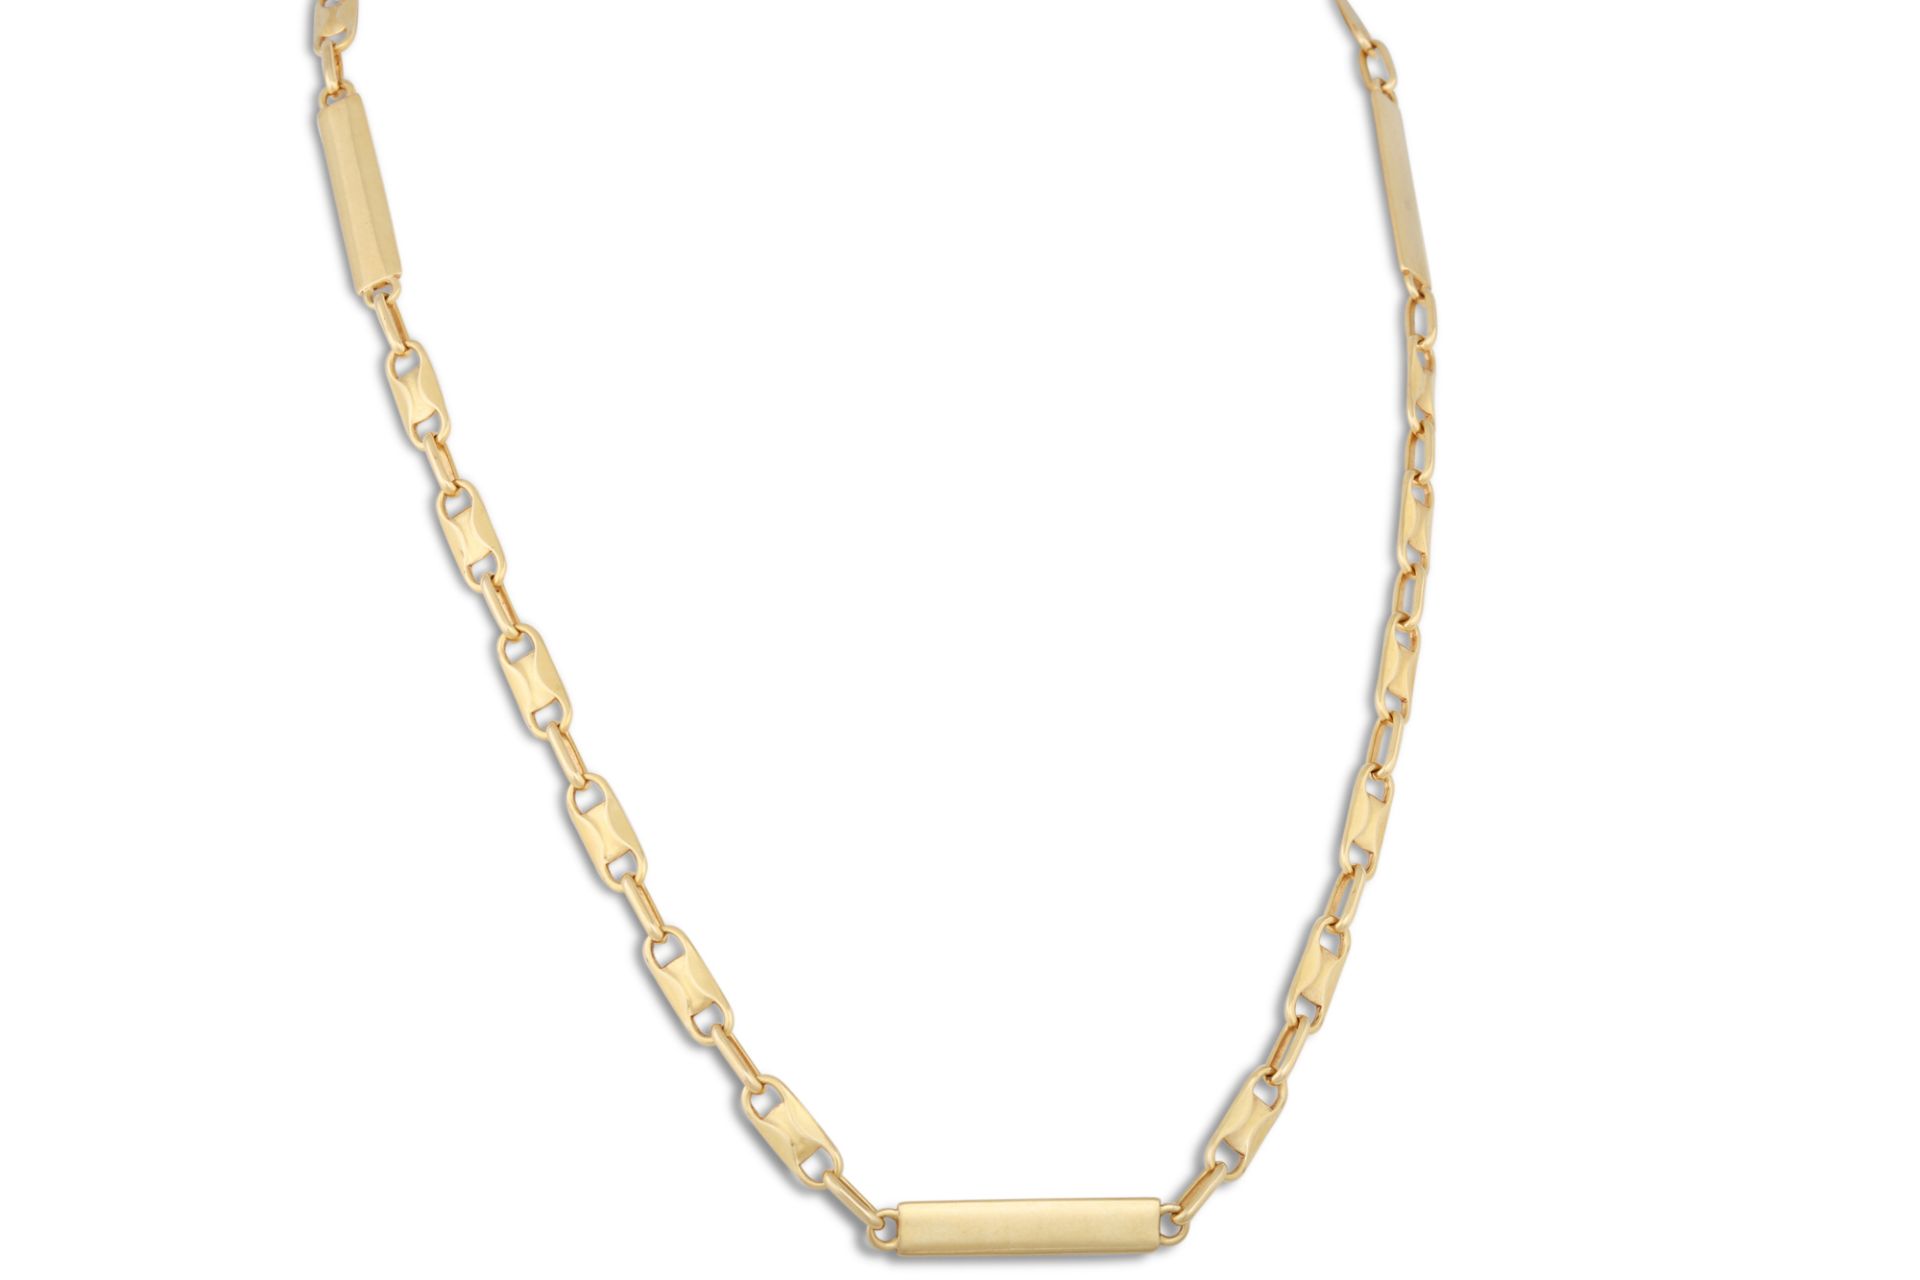 A 9CT YELLOW GOLD FANCY LINK NECKLACE, lobster clasp, 26.7 g.